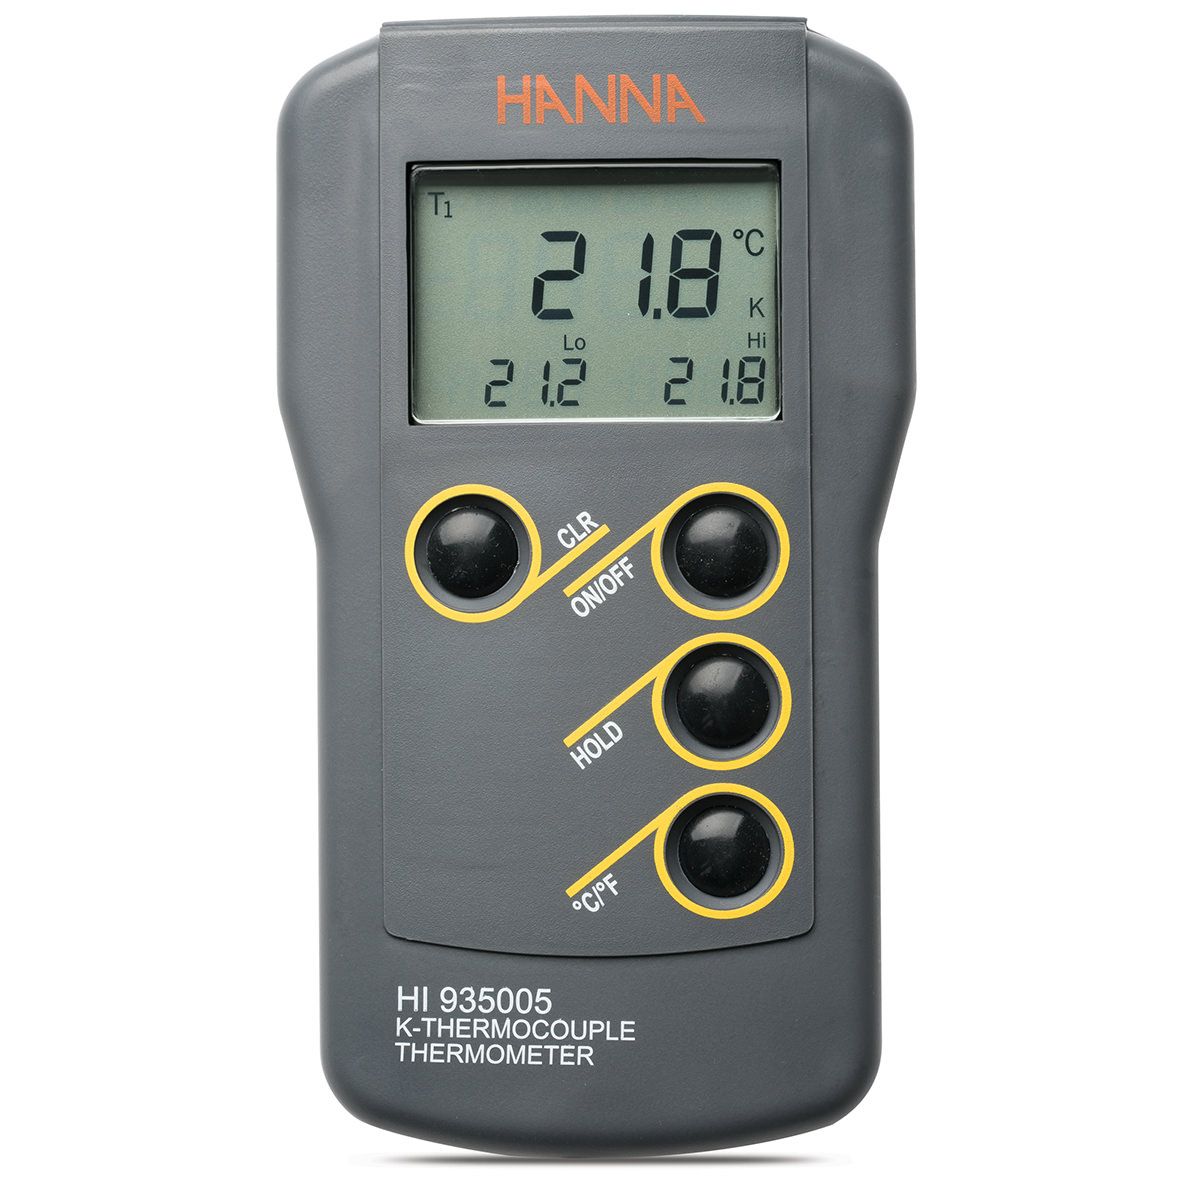 HANNA K-Type Thermocouple Thermometer with Auto-off Capability